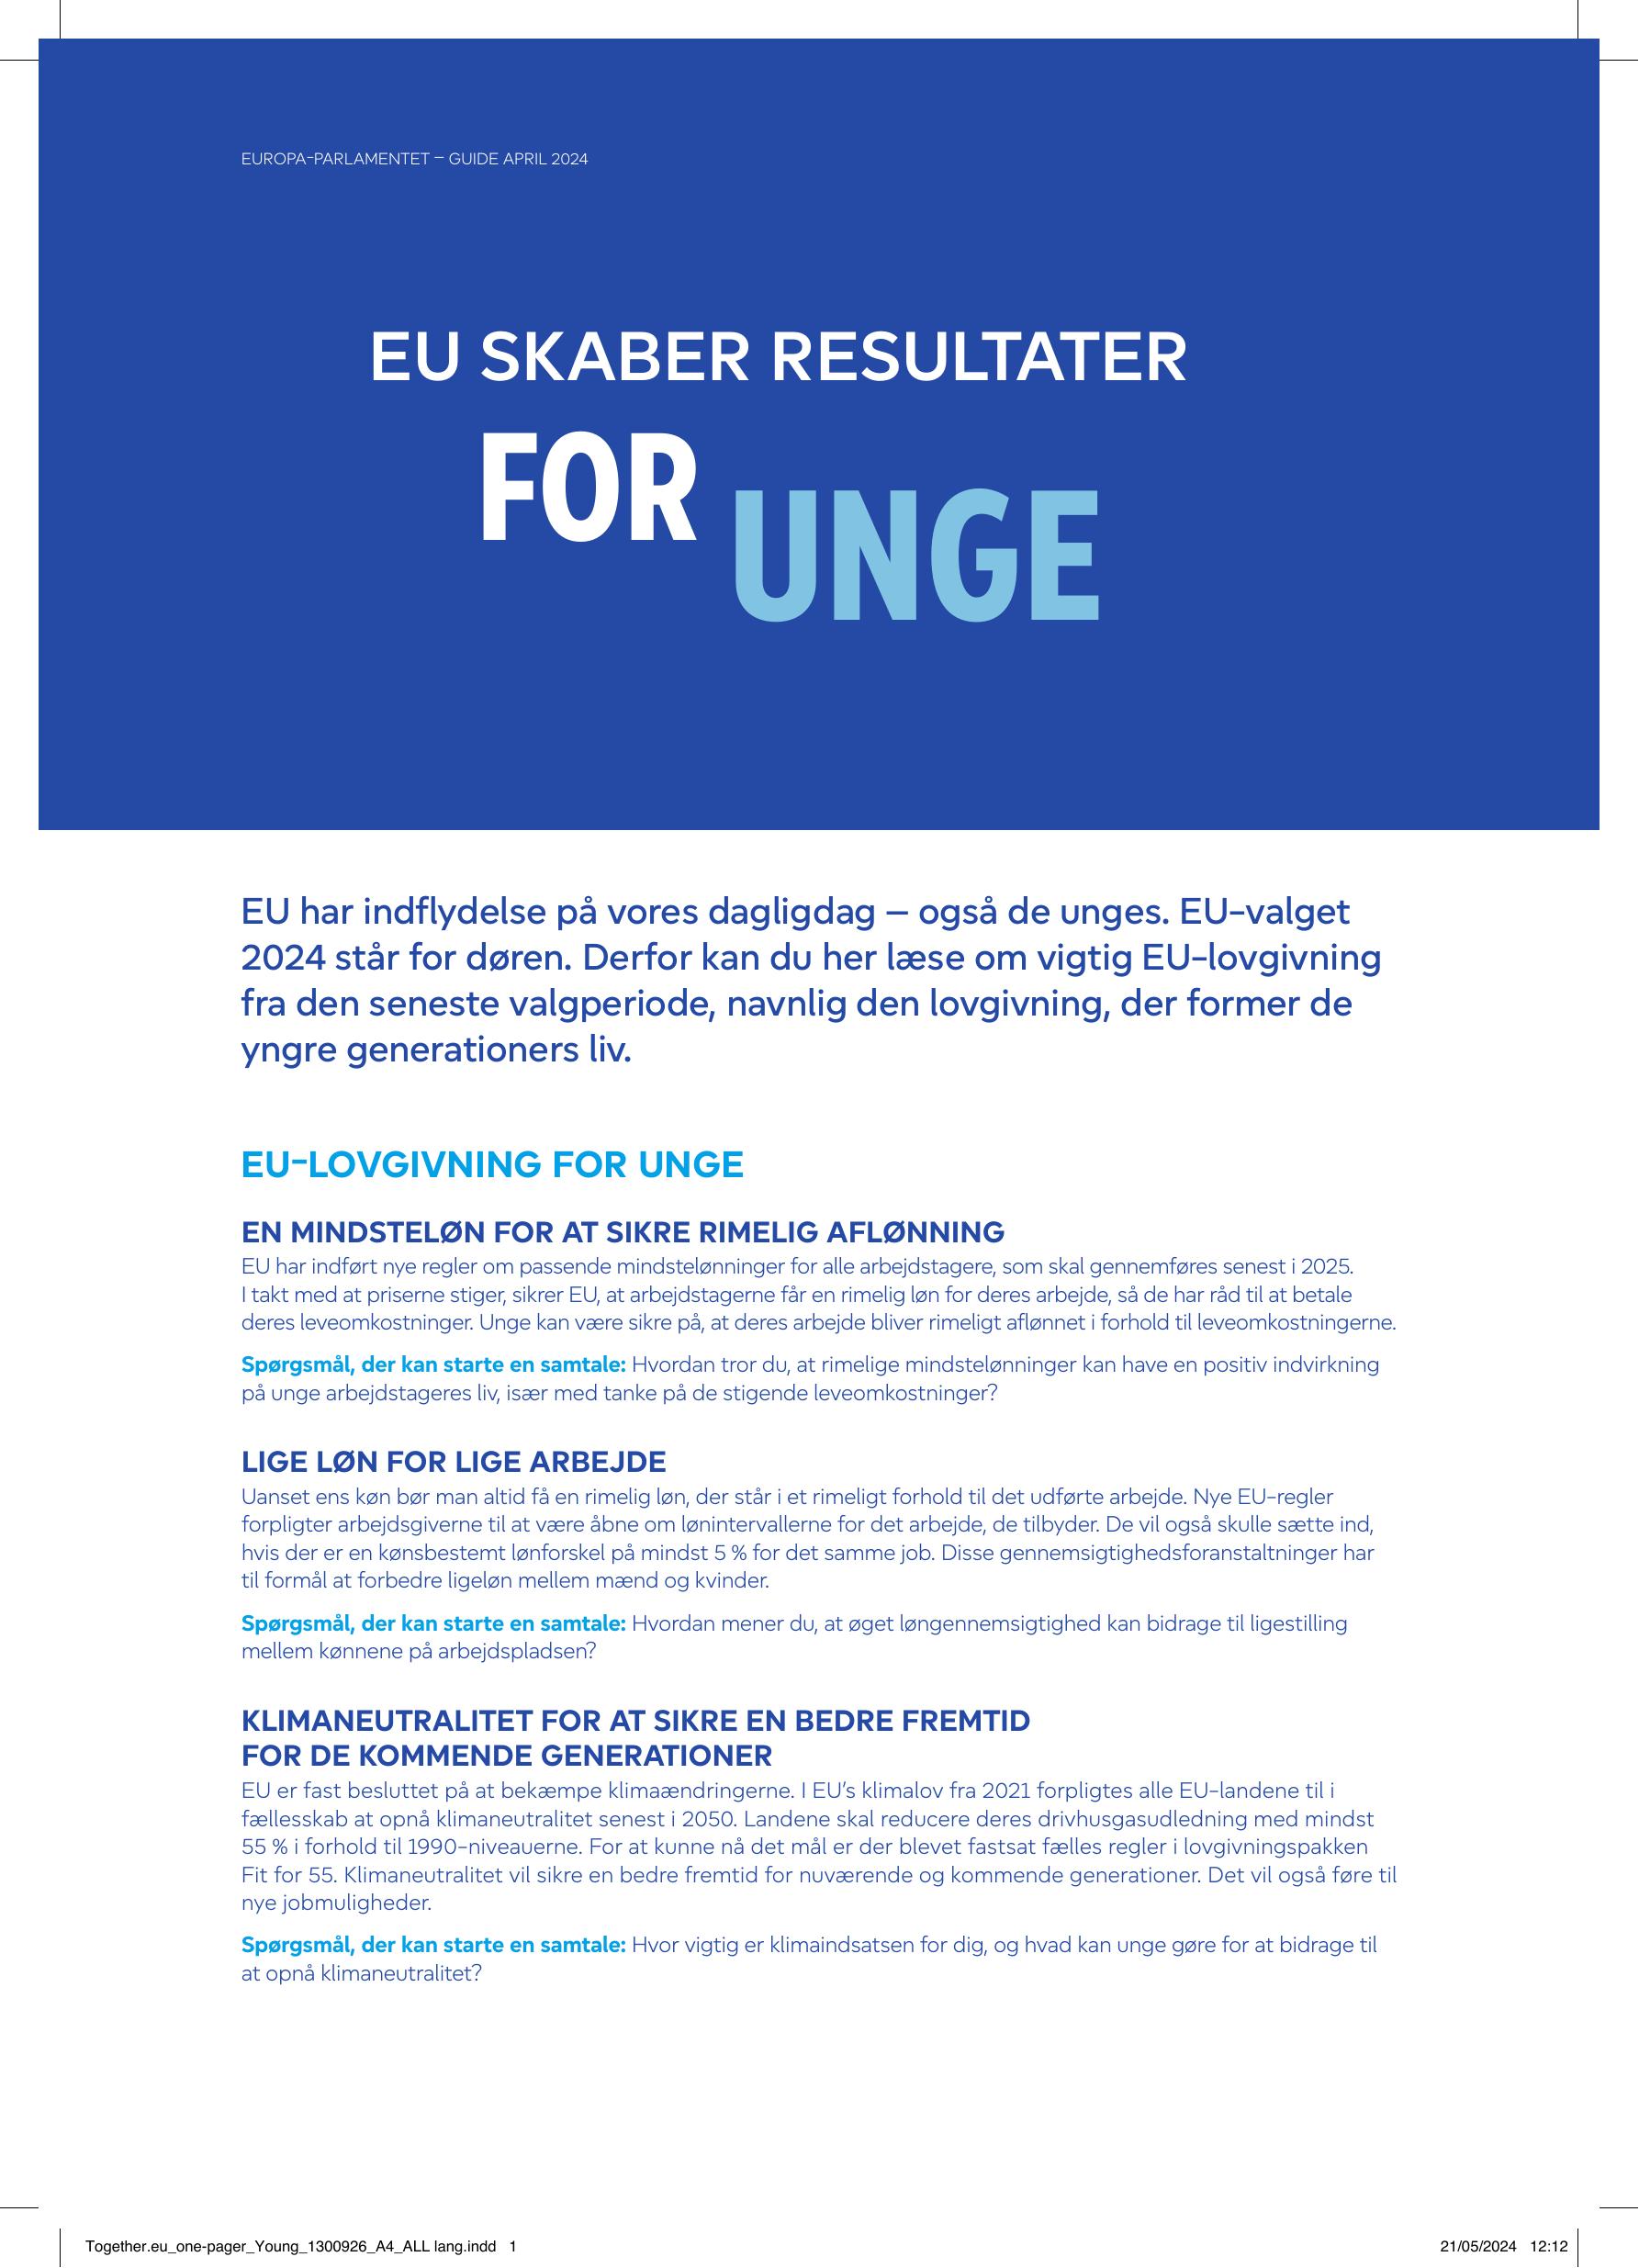 Together.eu_one-pager_Young_print.pdf